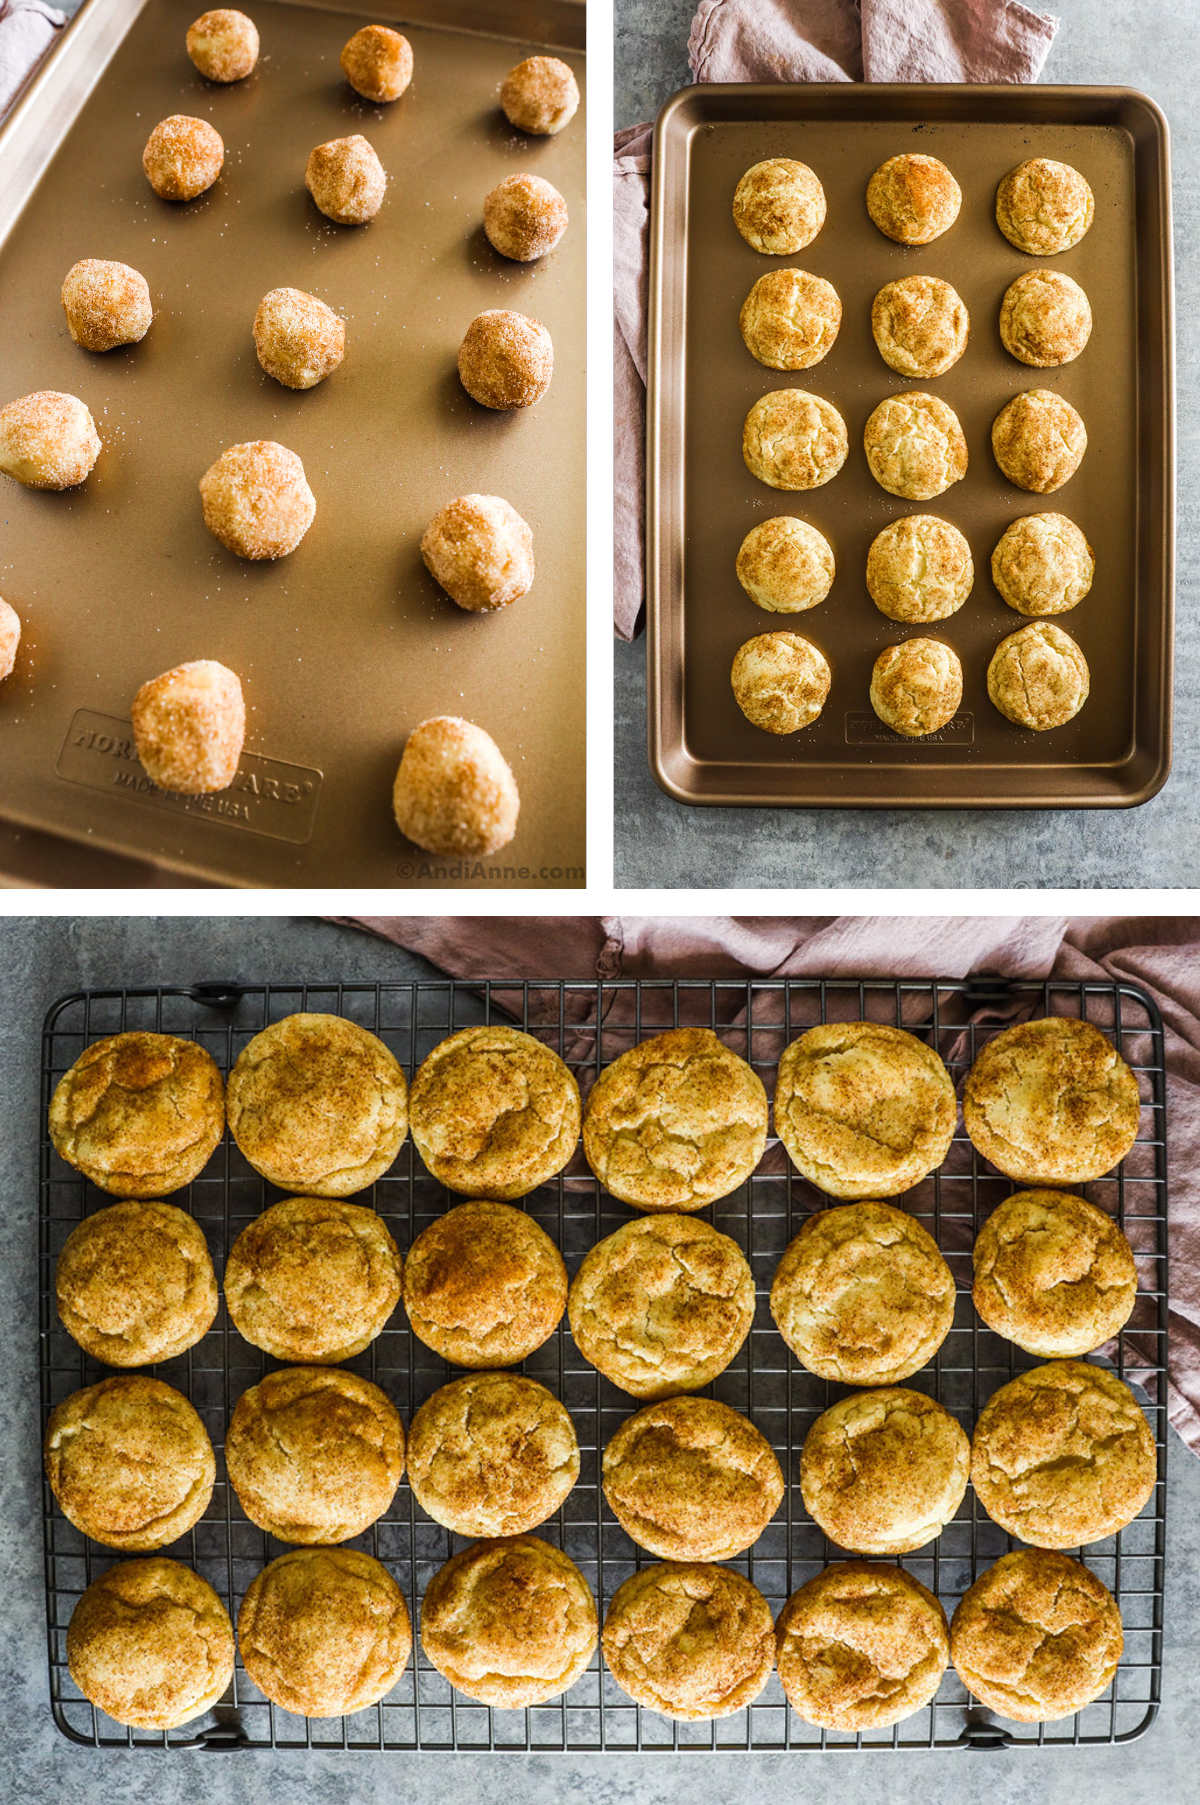 Three overhead images in one: 1. Cookie dough balls are set on baking sheet. 2. Cookies are on baking sheet cooked. 3. Cookies are on rack cooling.